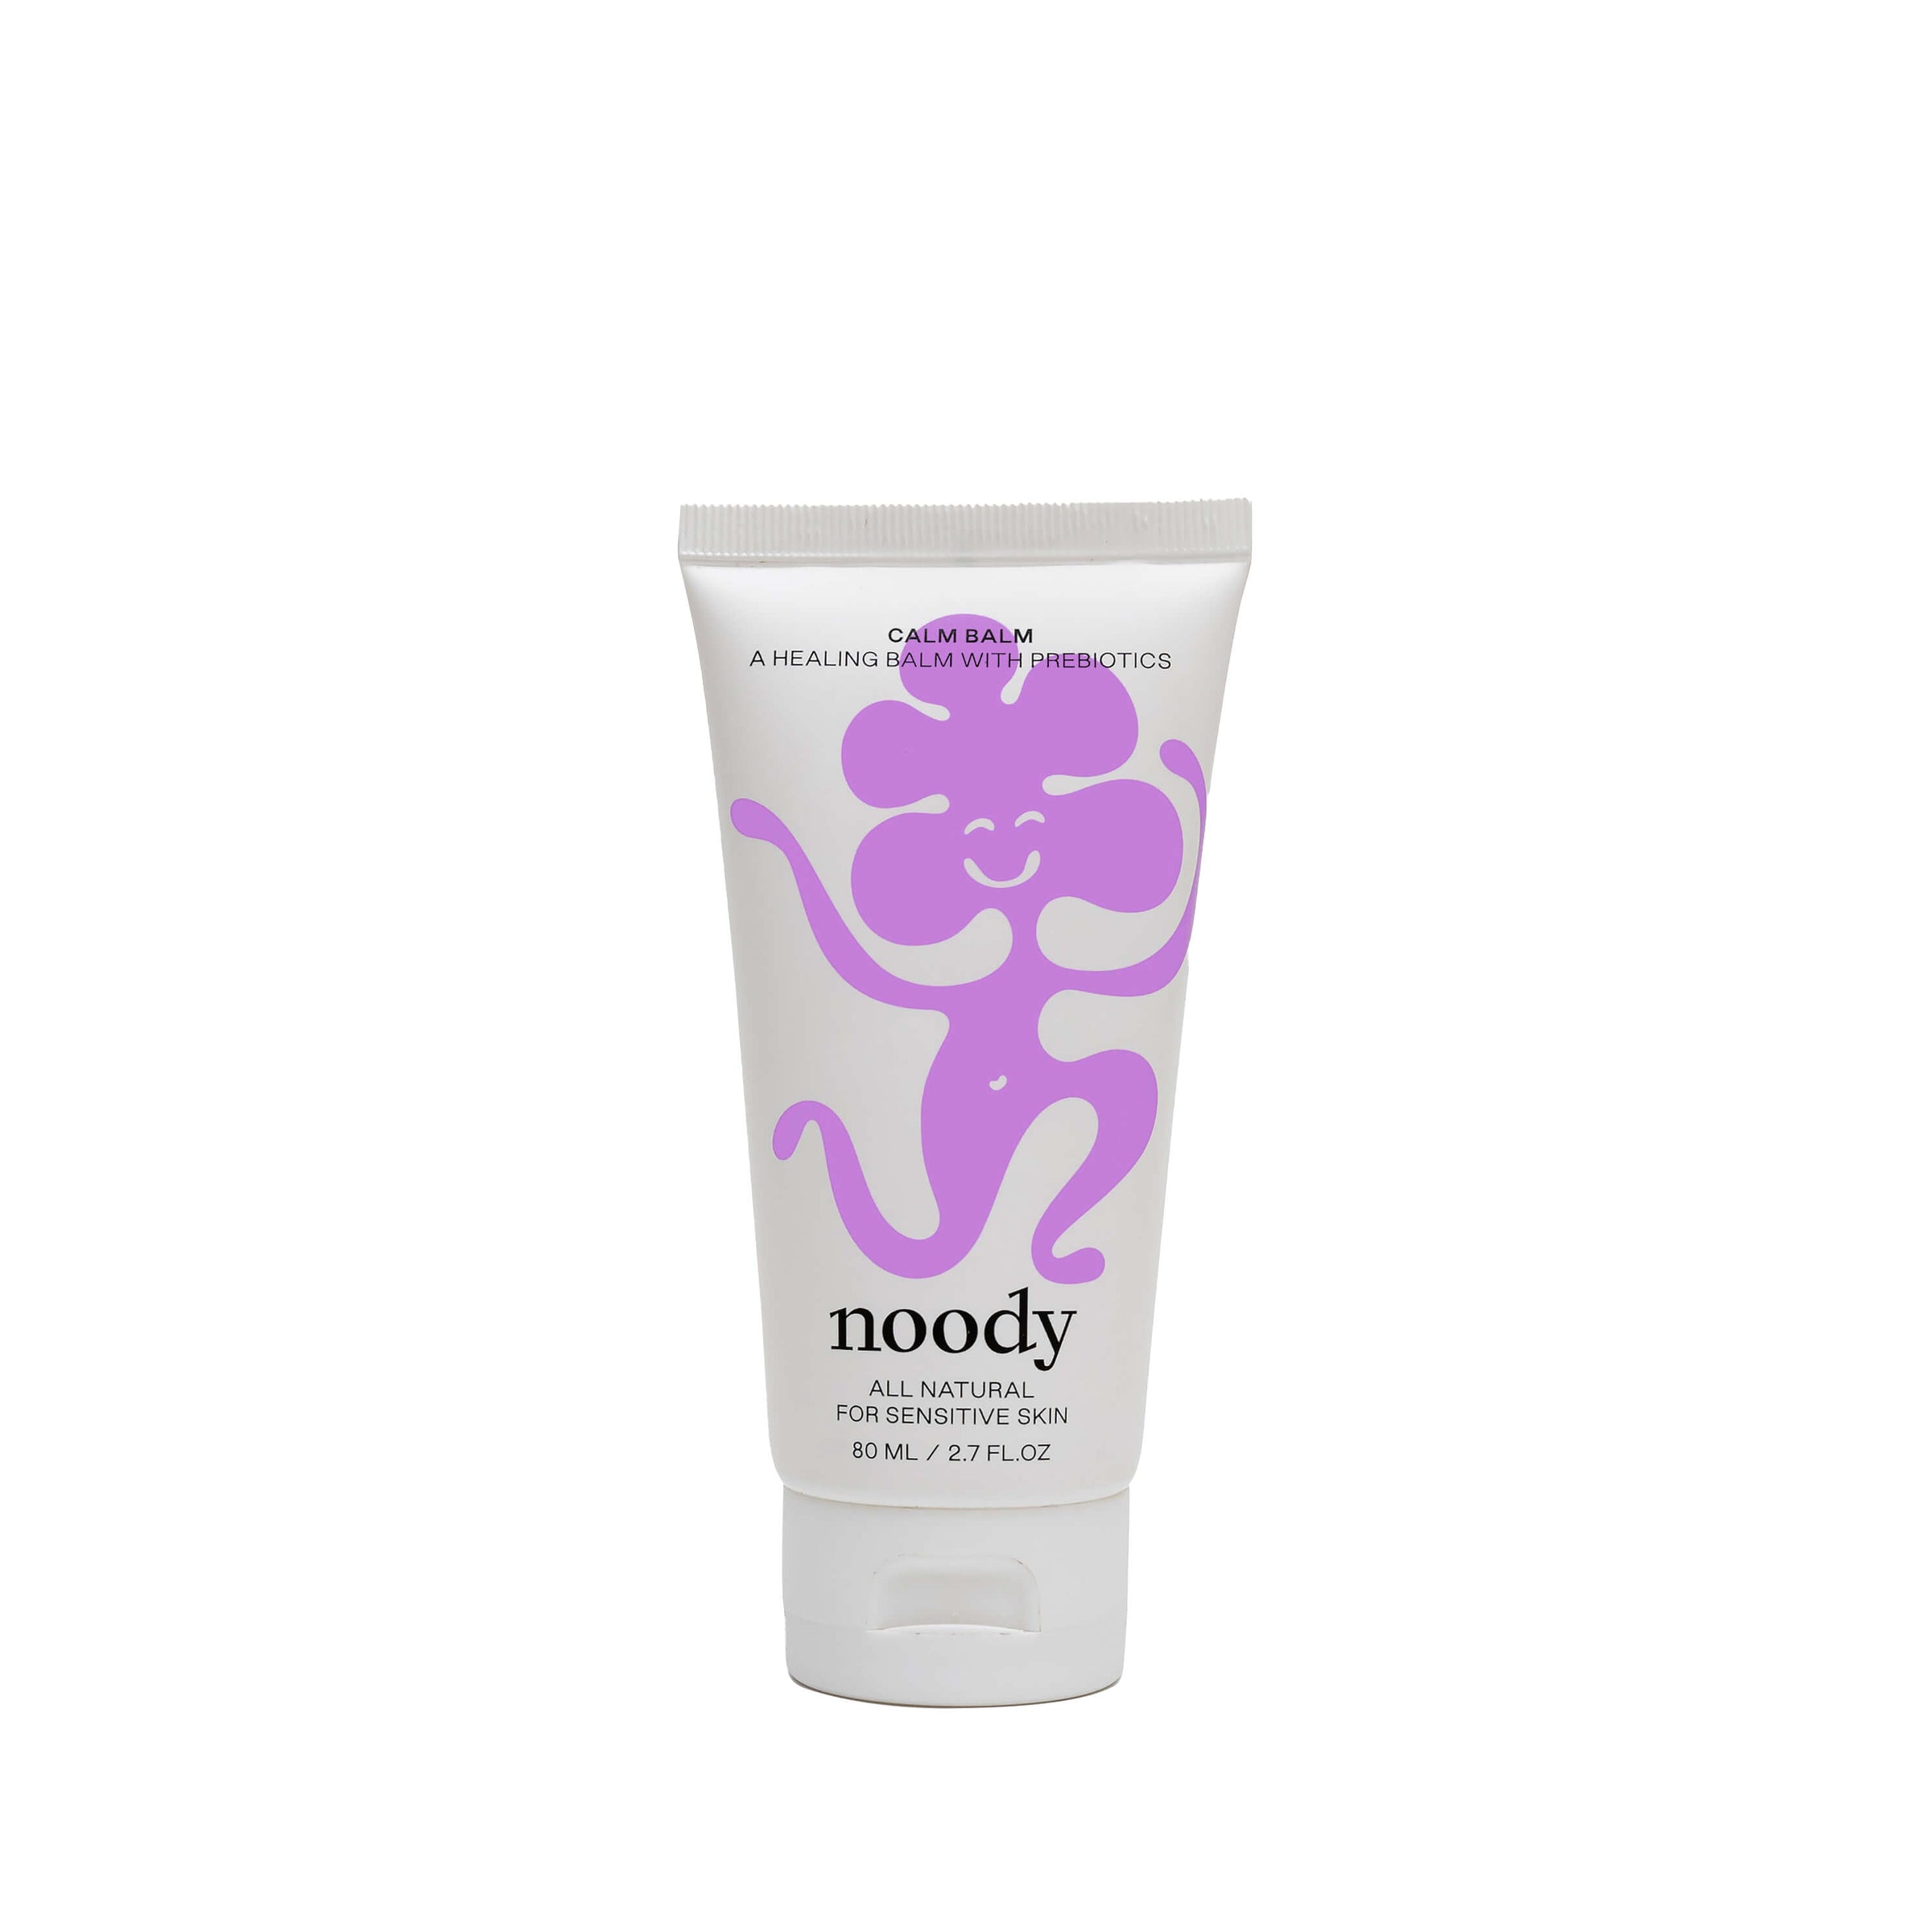 Noody Calm Healing Balm for eczema and first aid kit